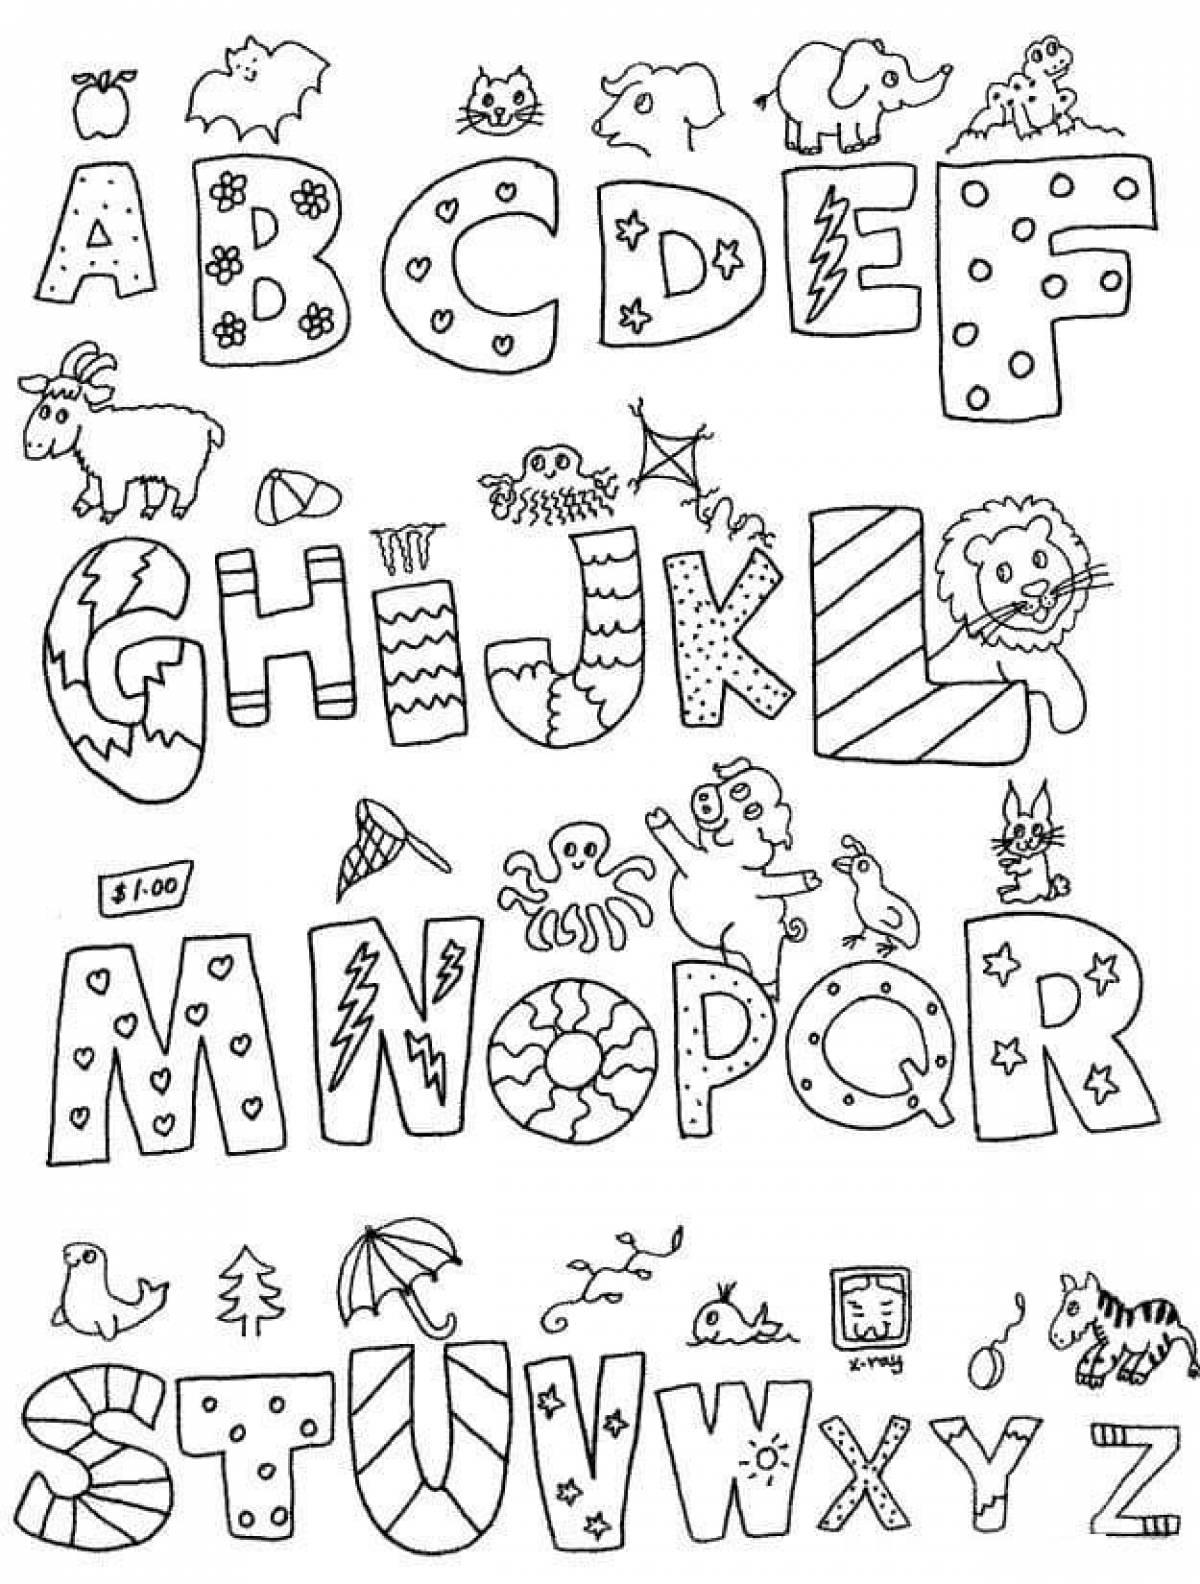 Colorful coloring page with english alphabet for kids of all faiths